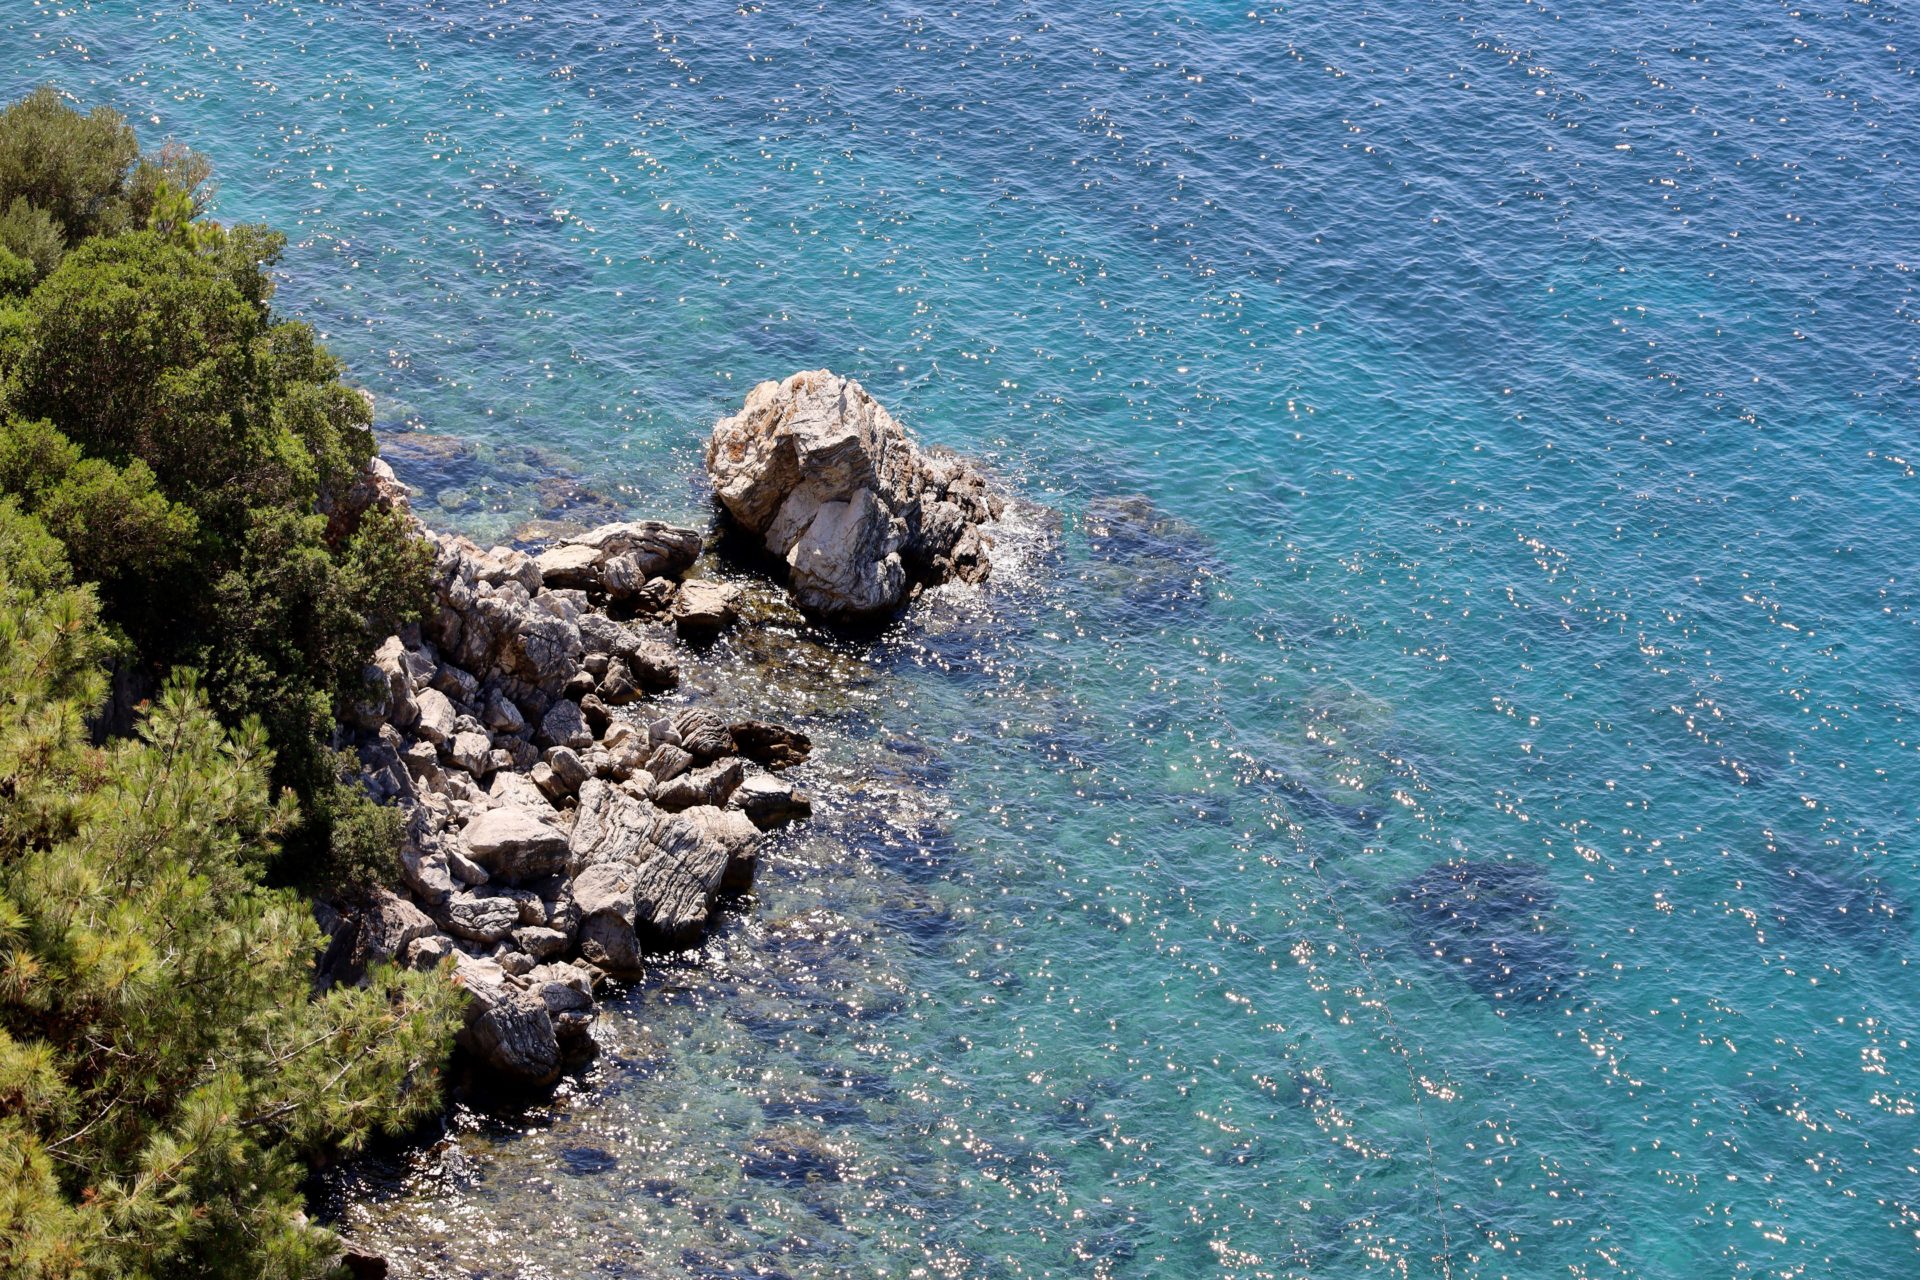 Aerial view to rocky cliff with pine trees in Mediterranean sea. Image: Oleg Elkov / Alamy Stock Photo